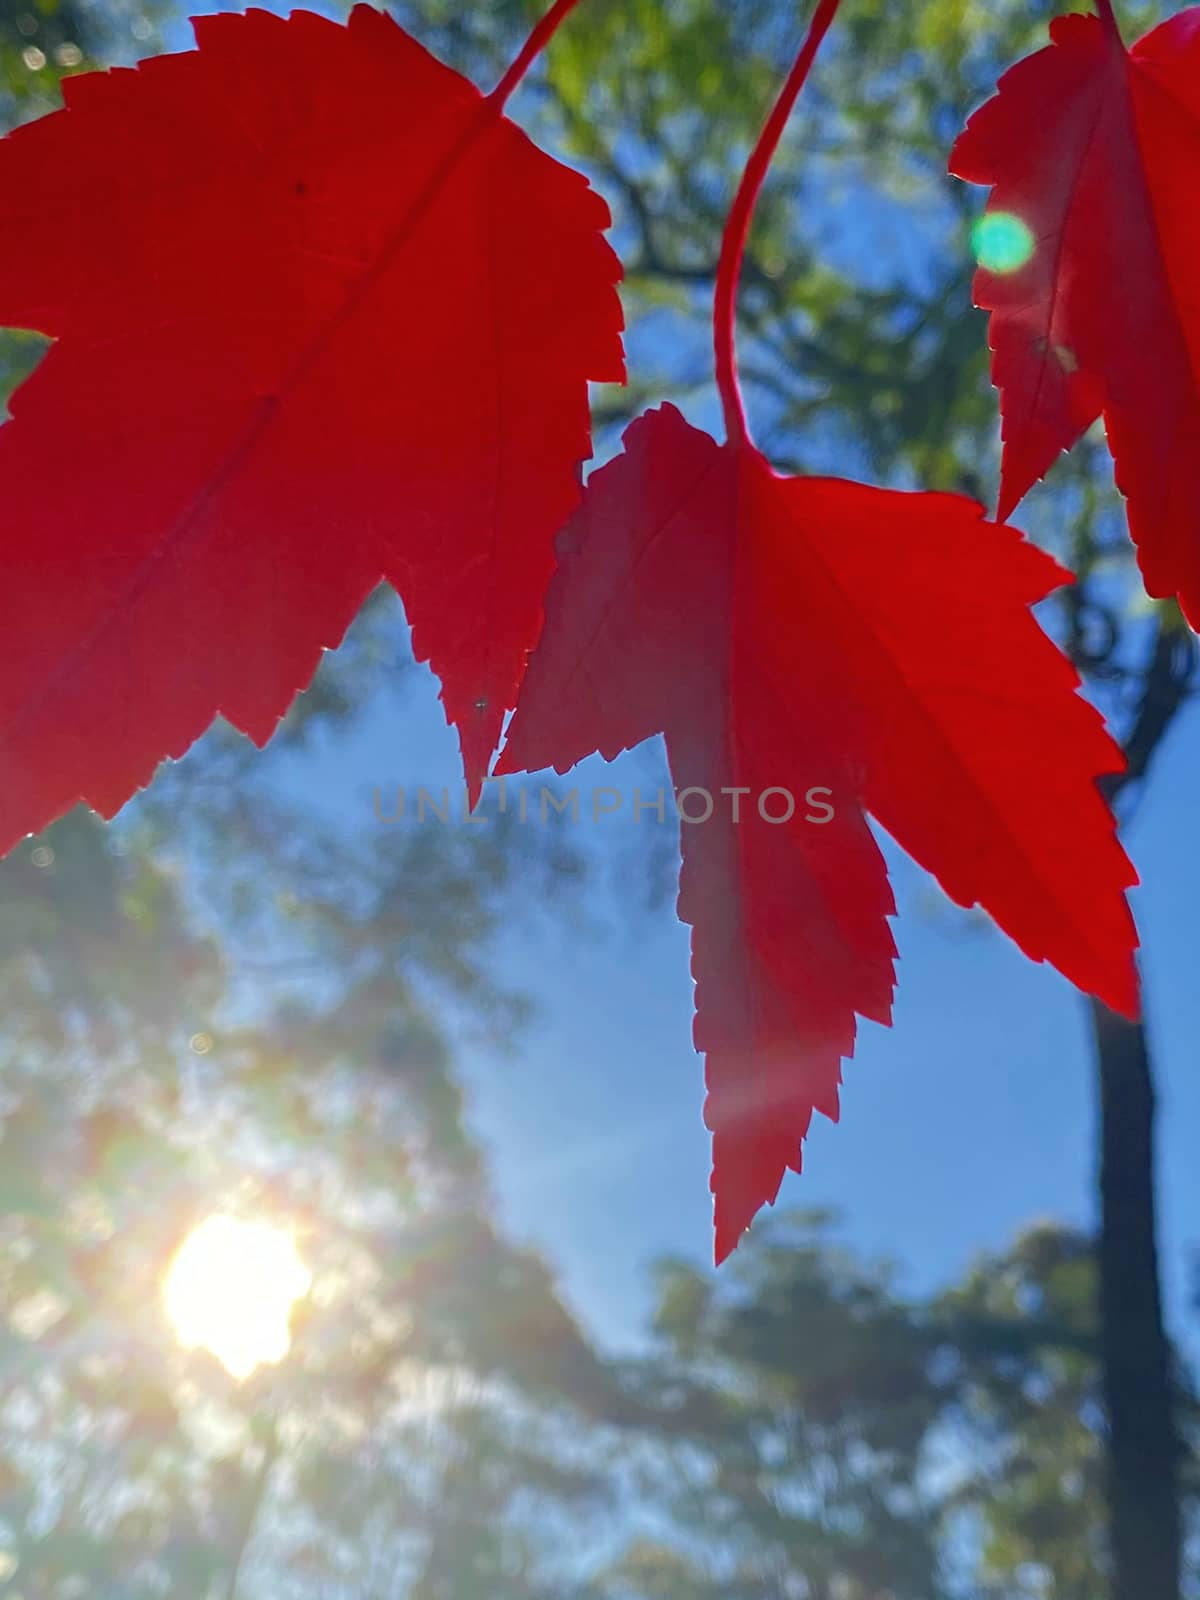 Red maple leaves in autumn that are about to fall